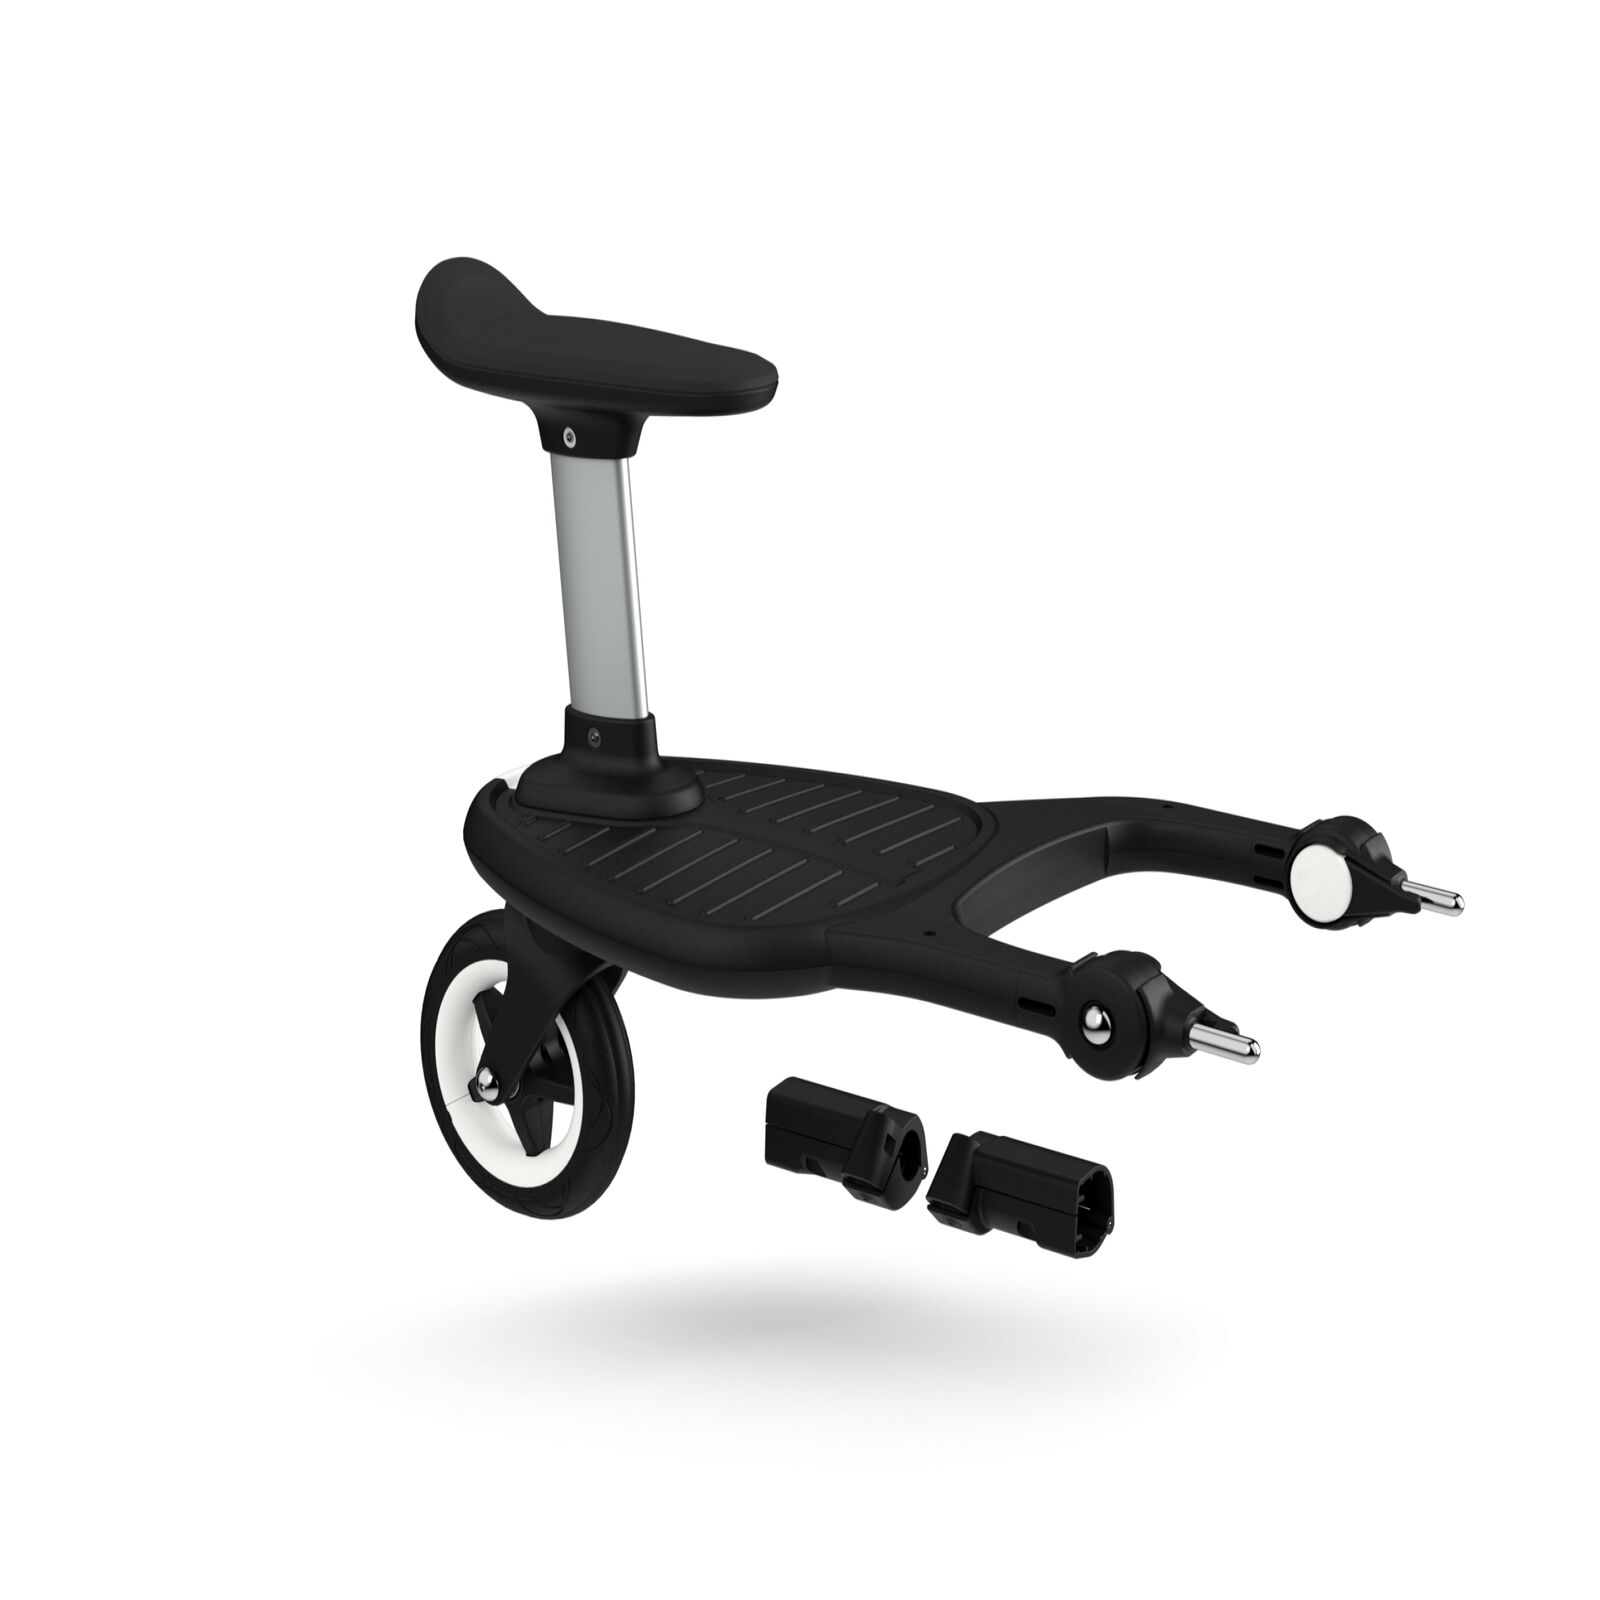 Bugaboo Cameleon 3 adapter for Bugaboo comfort wheeled board - View 5